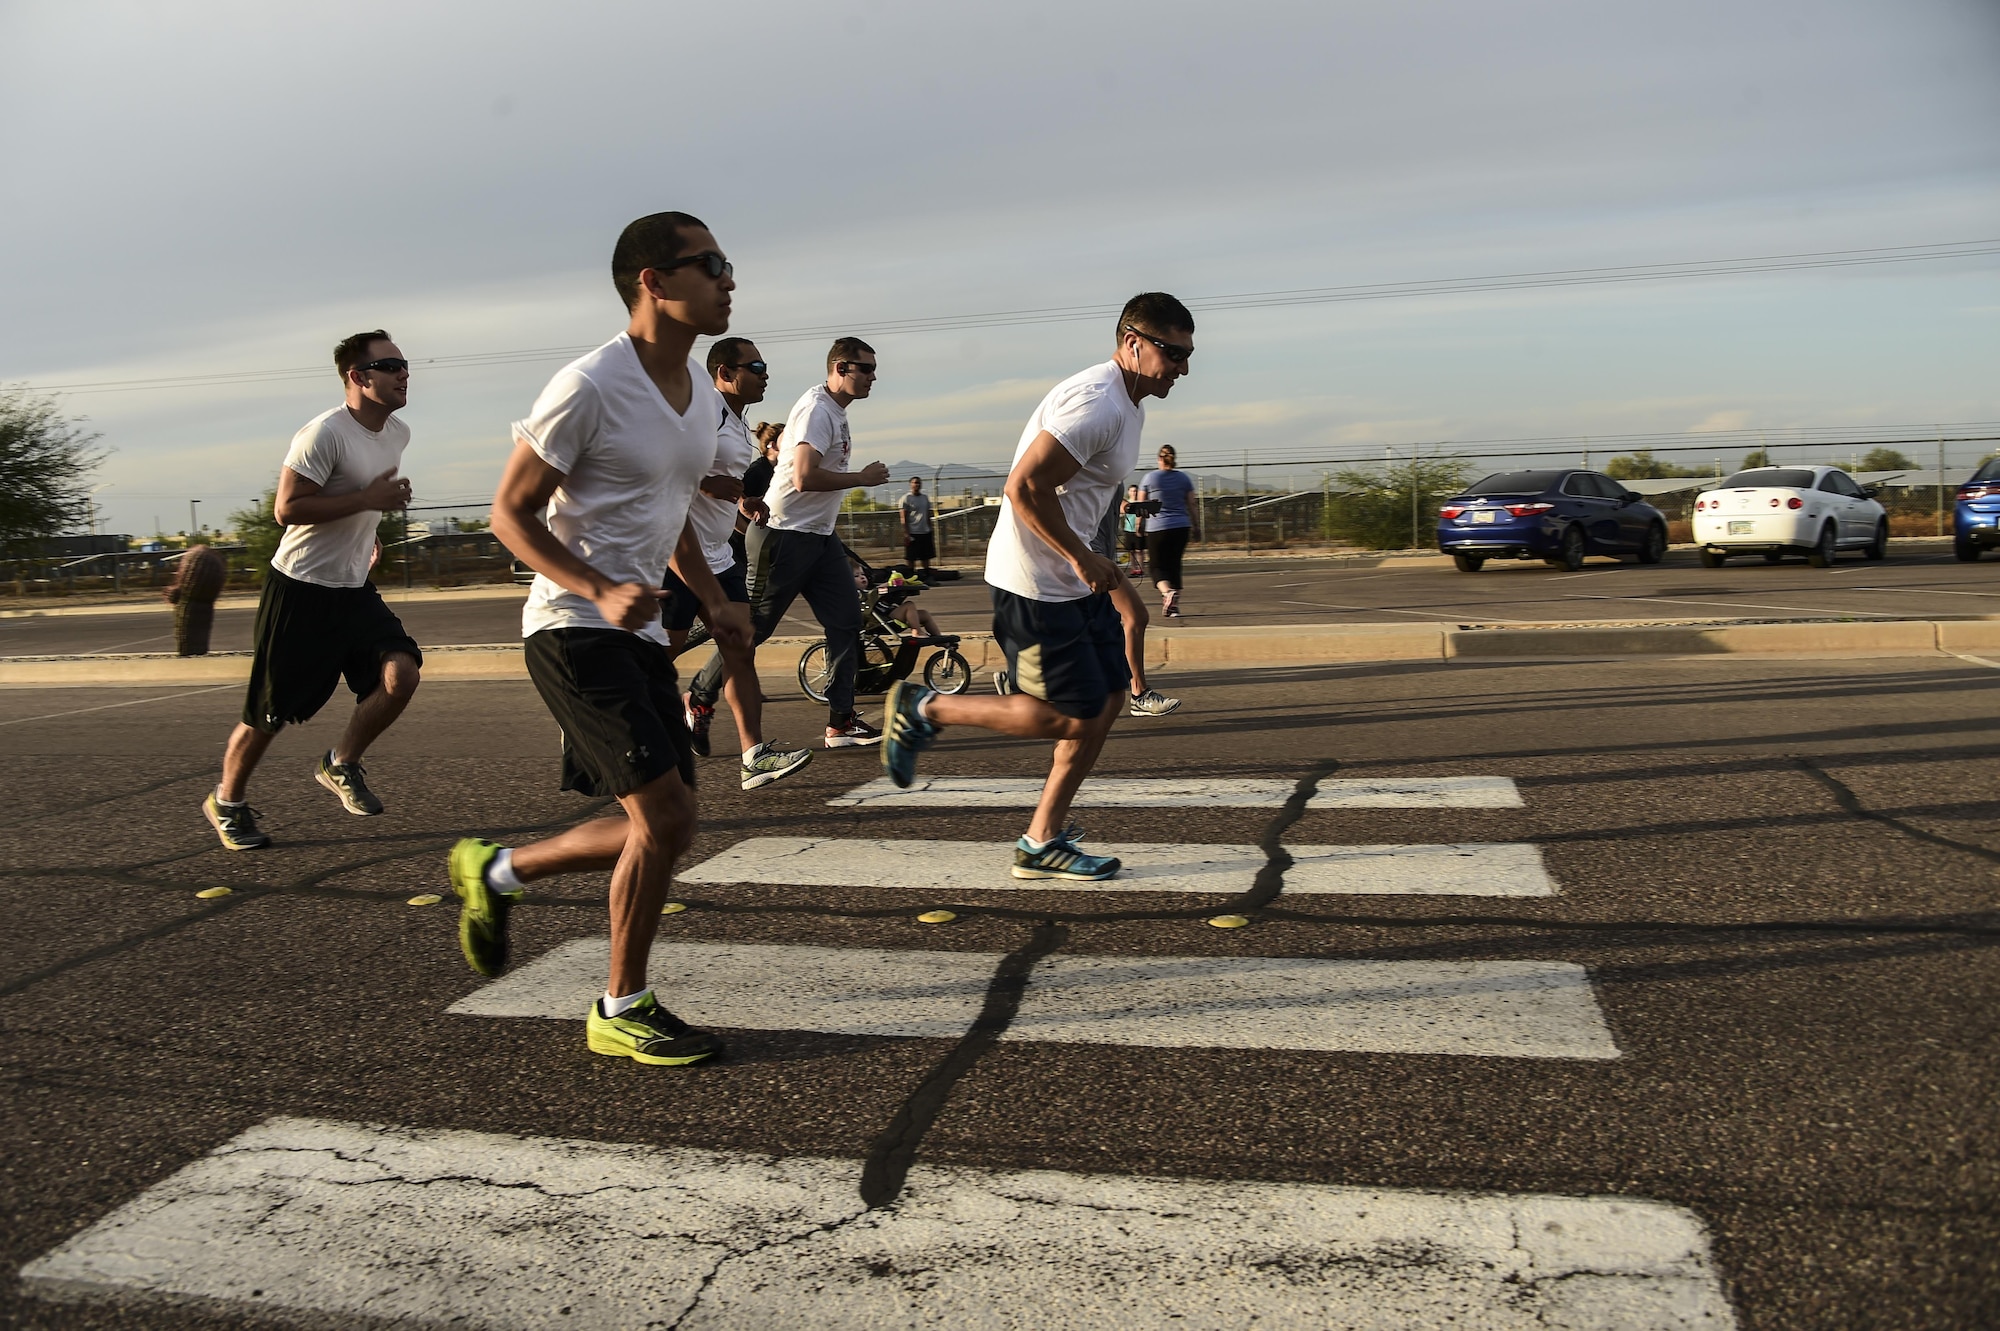 Runners participating in the LGBT Pride Month 5k color run begin the 3.1-mile run June 1, 2017 at Luke Air Force Base, Ariz. The run was open to any current or past service members. (U.S. Air Force photo by Airman 1st Class Caleb Worpel)